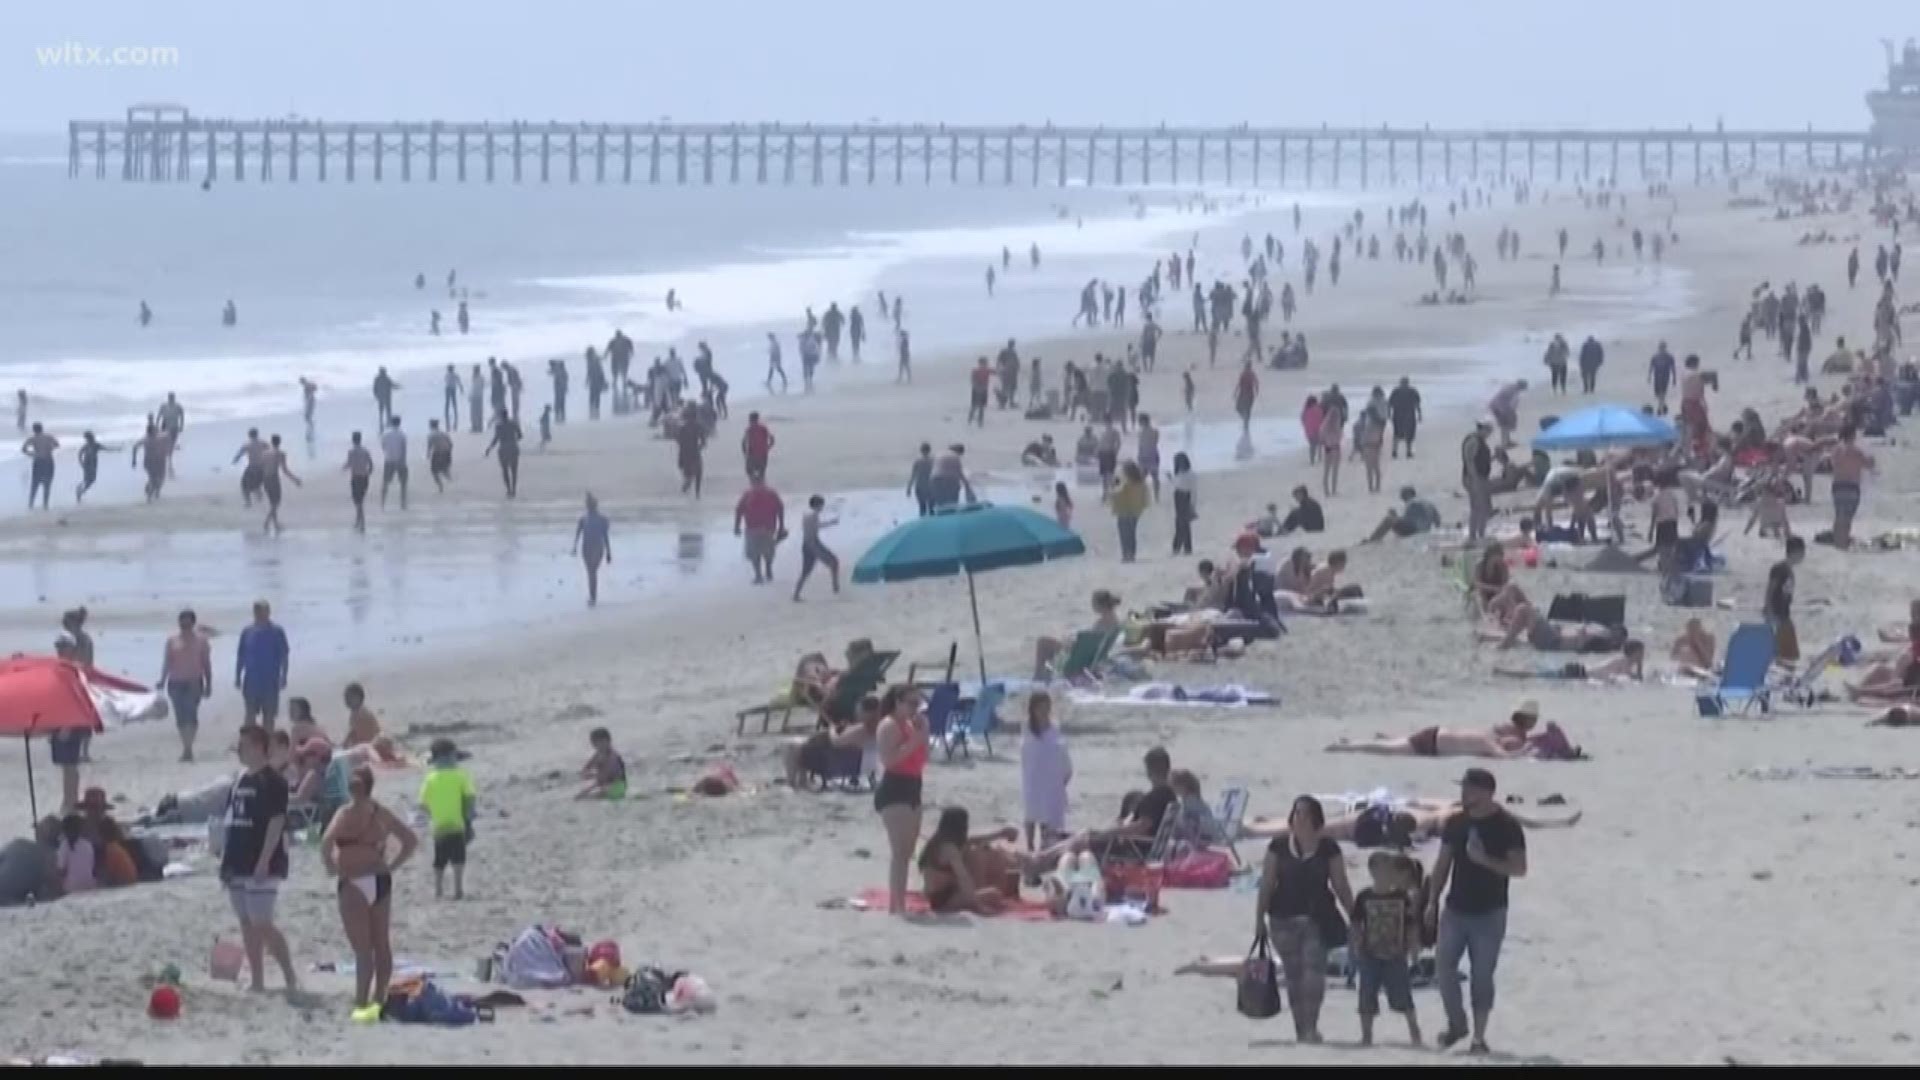 Some lifeguard companies also responsible for umbrella rentals, concessions along portions of Grand Strand beaches